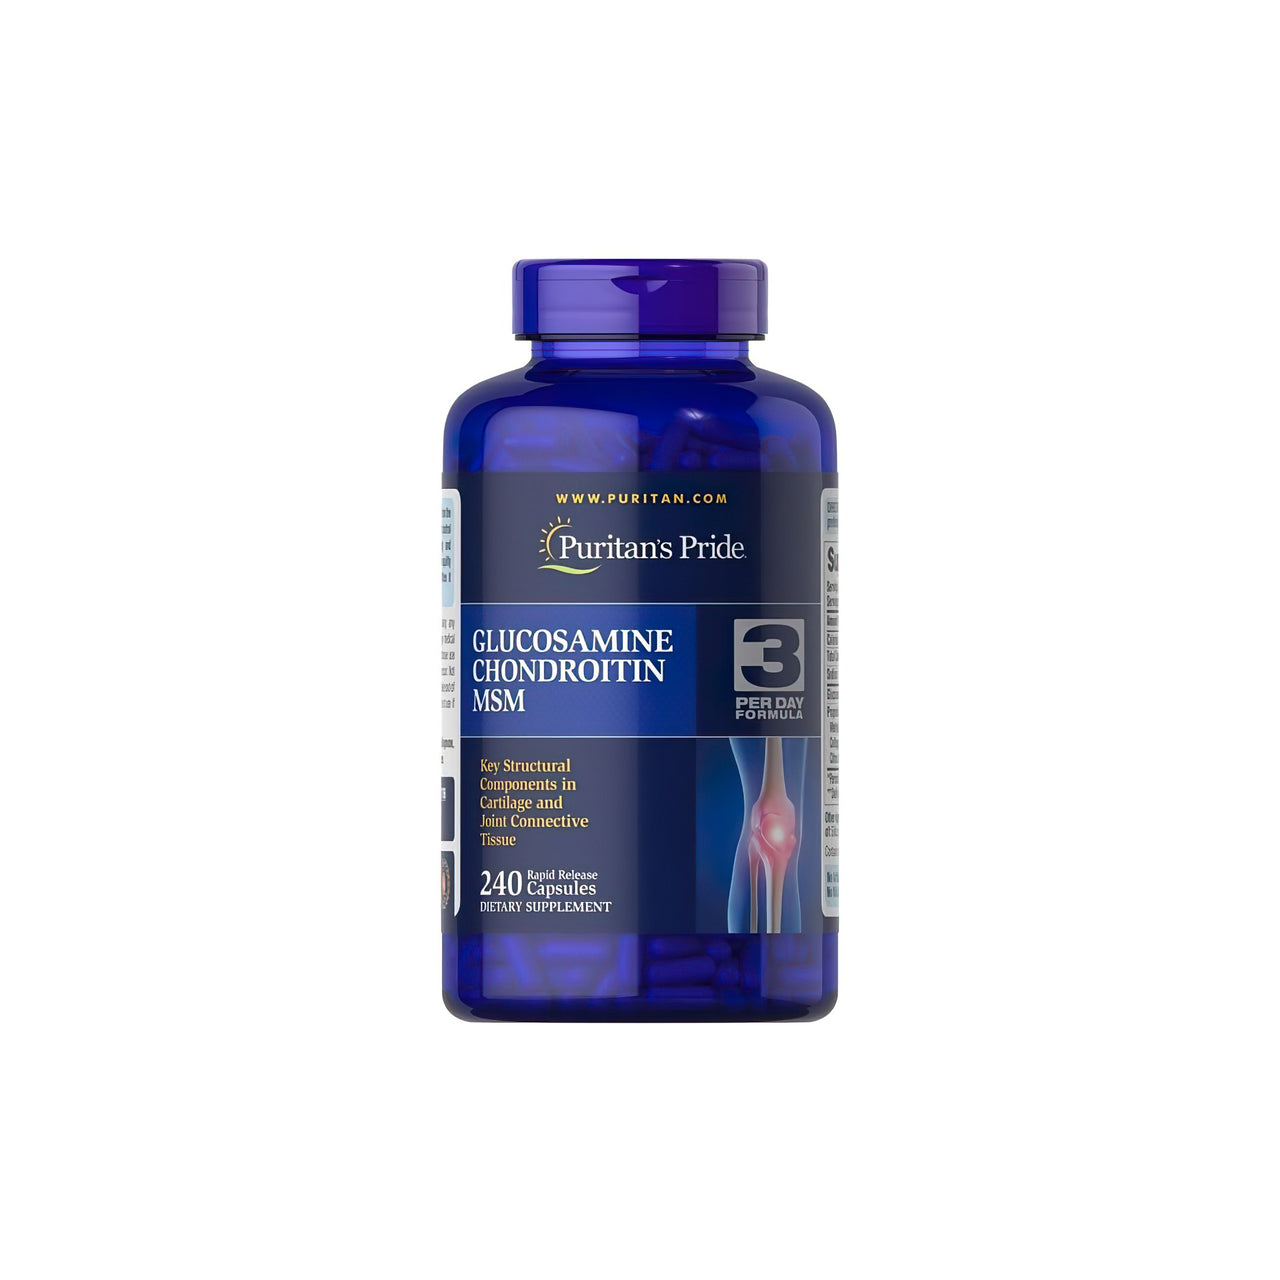 A bottle of Glucosamine Chondroitin MSM 240 capsules by Puritan's Pride.